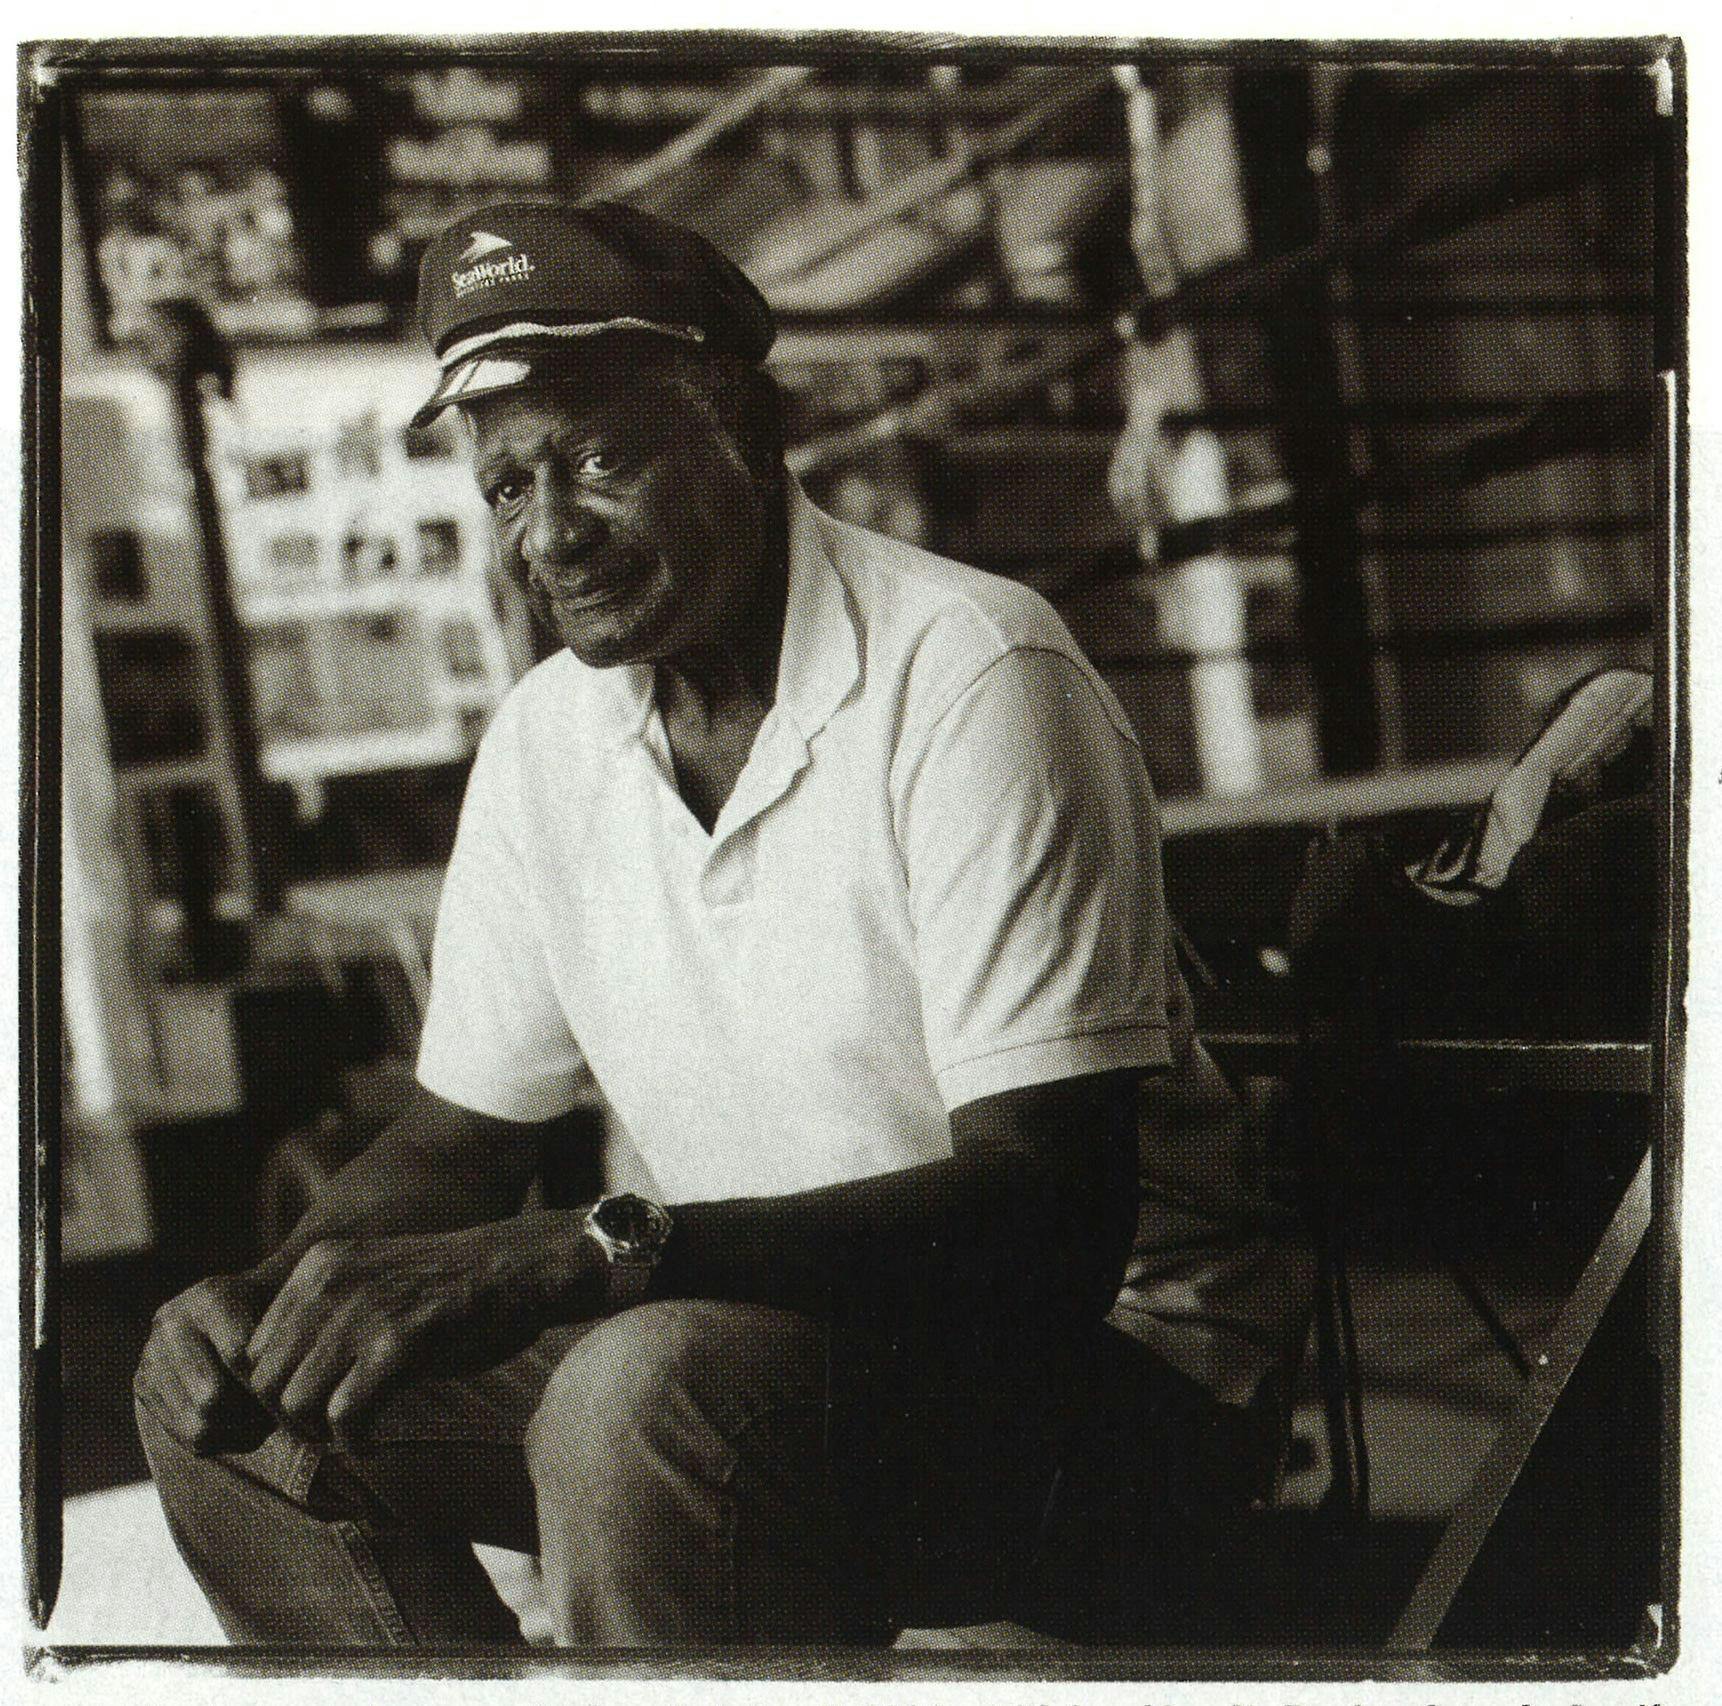 Henderson, photographed on October 5, 2004, at Richard Lord's Boxing Gym, in Austin.